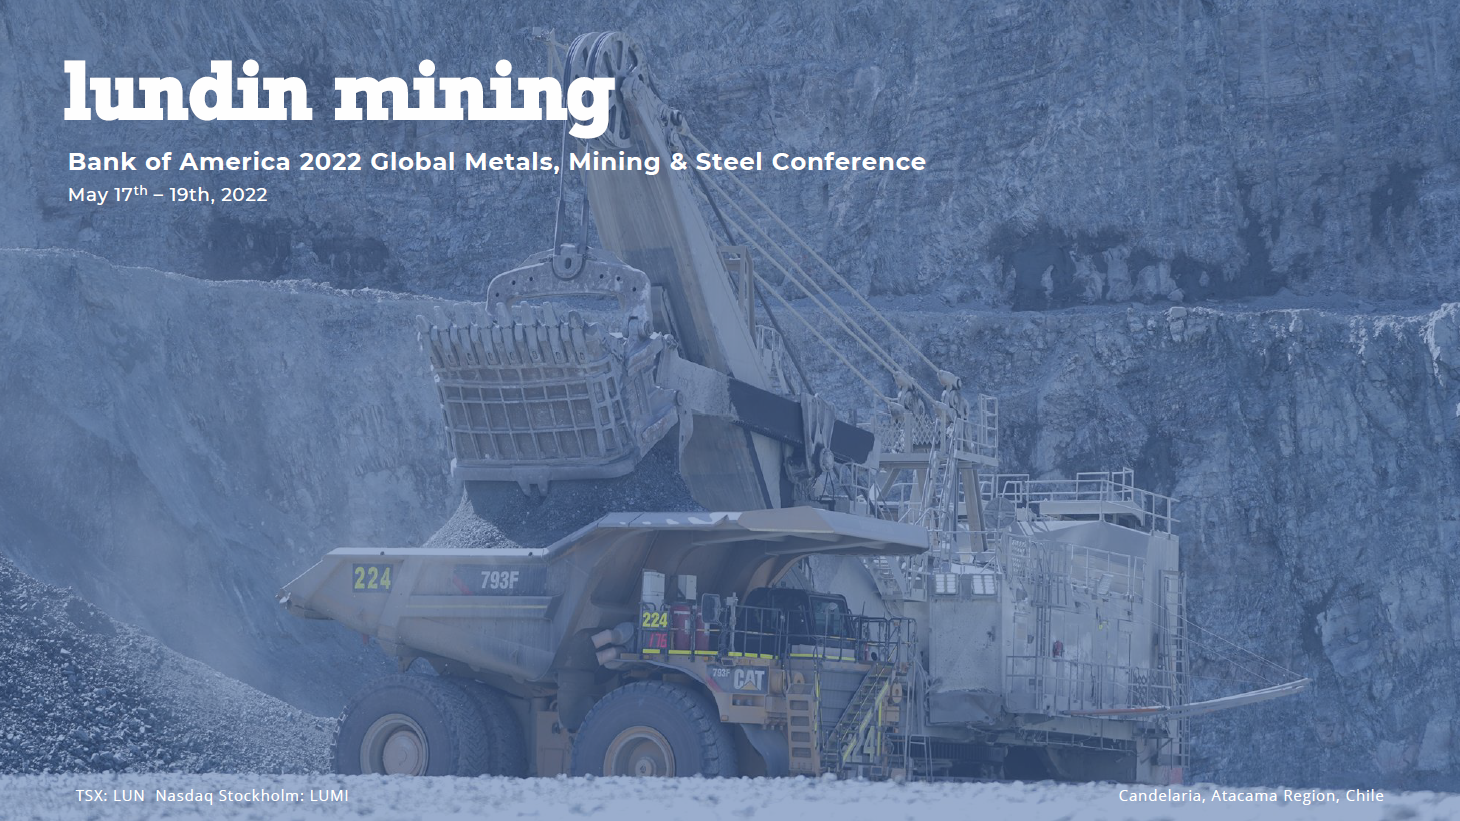 Bank of America 2022 Global Metals, Mining & Steel Conference